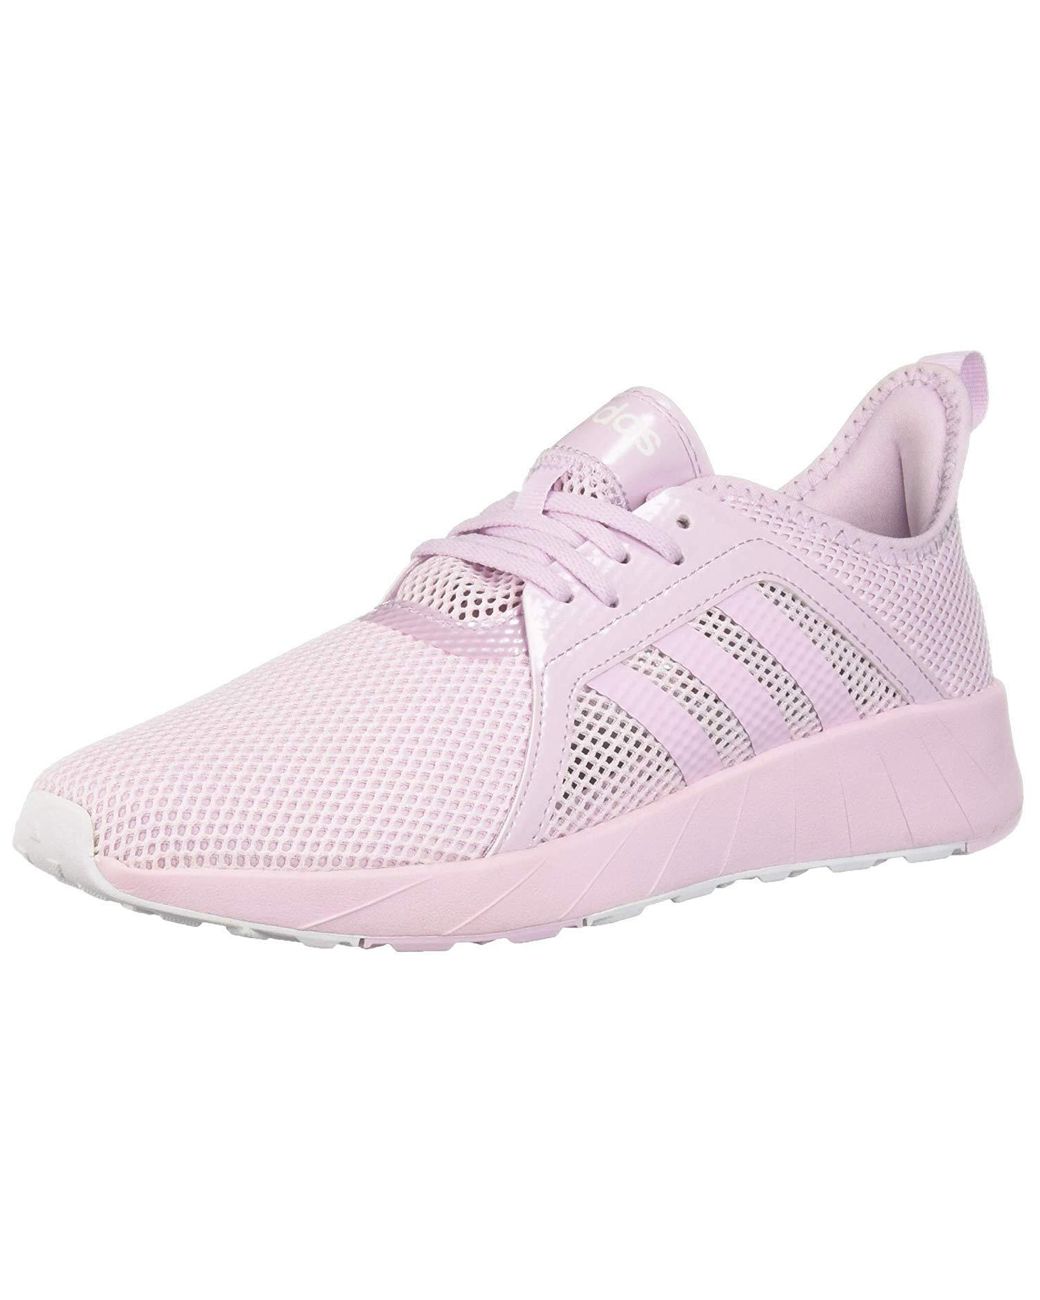 adidas Lace Questar Sumr in Pink - Save 